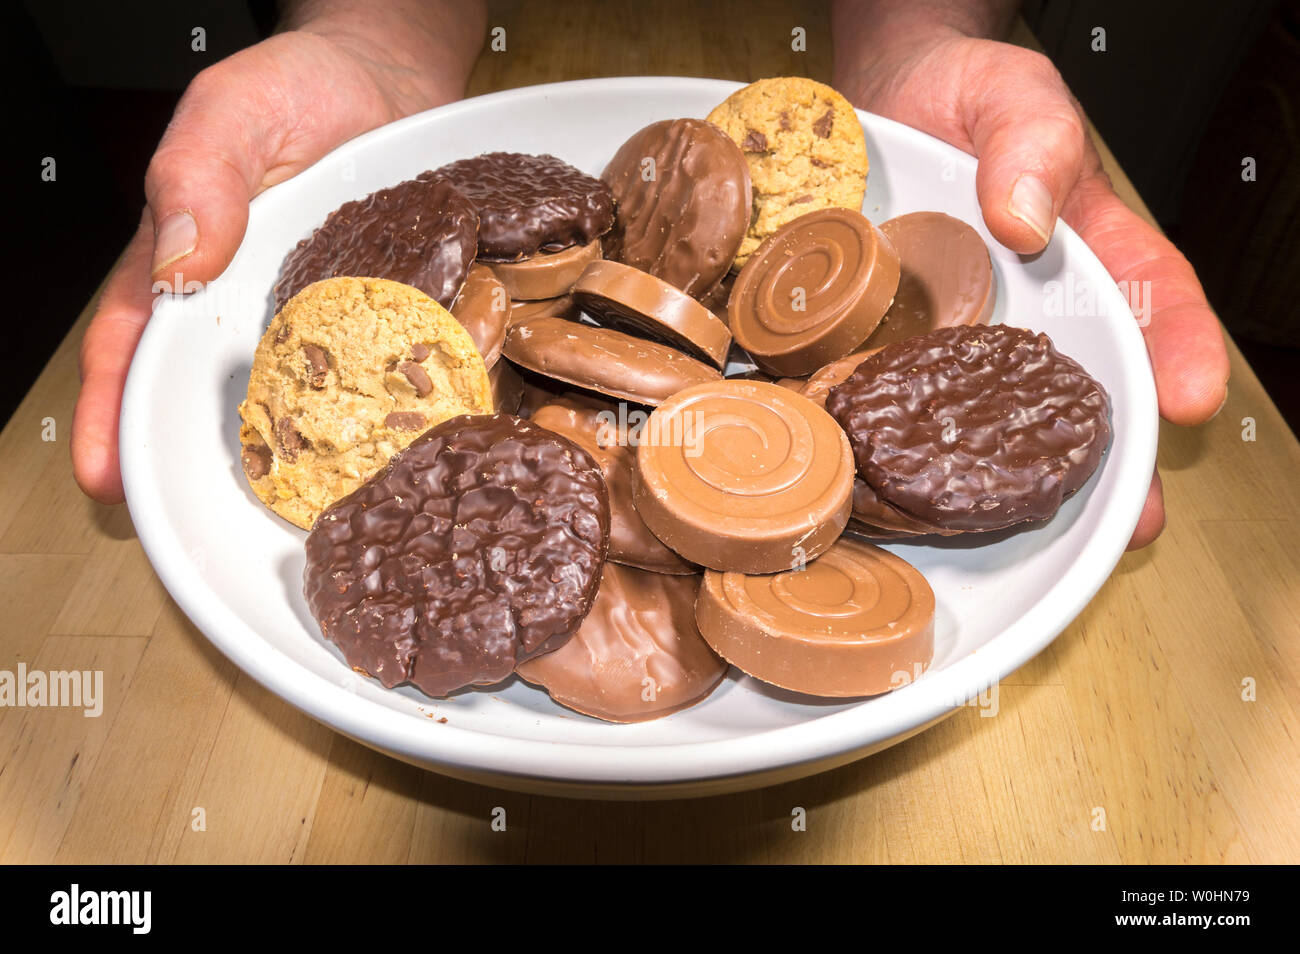 Closeup of a man’s hands serving a white shallow bowl on a table, containing a variety of round chocolate coated biscuits. Stock Photo